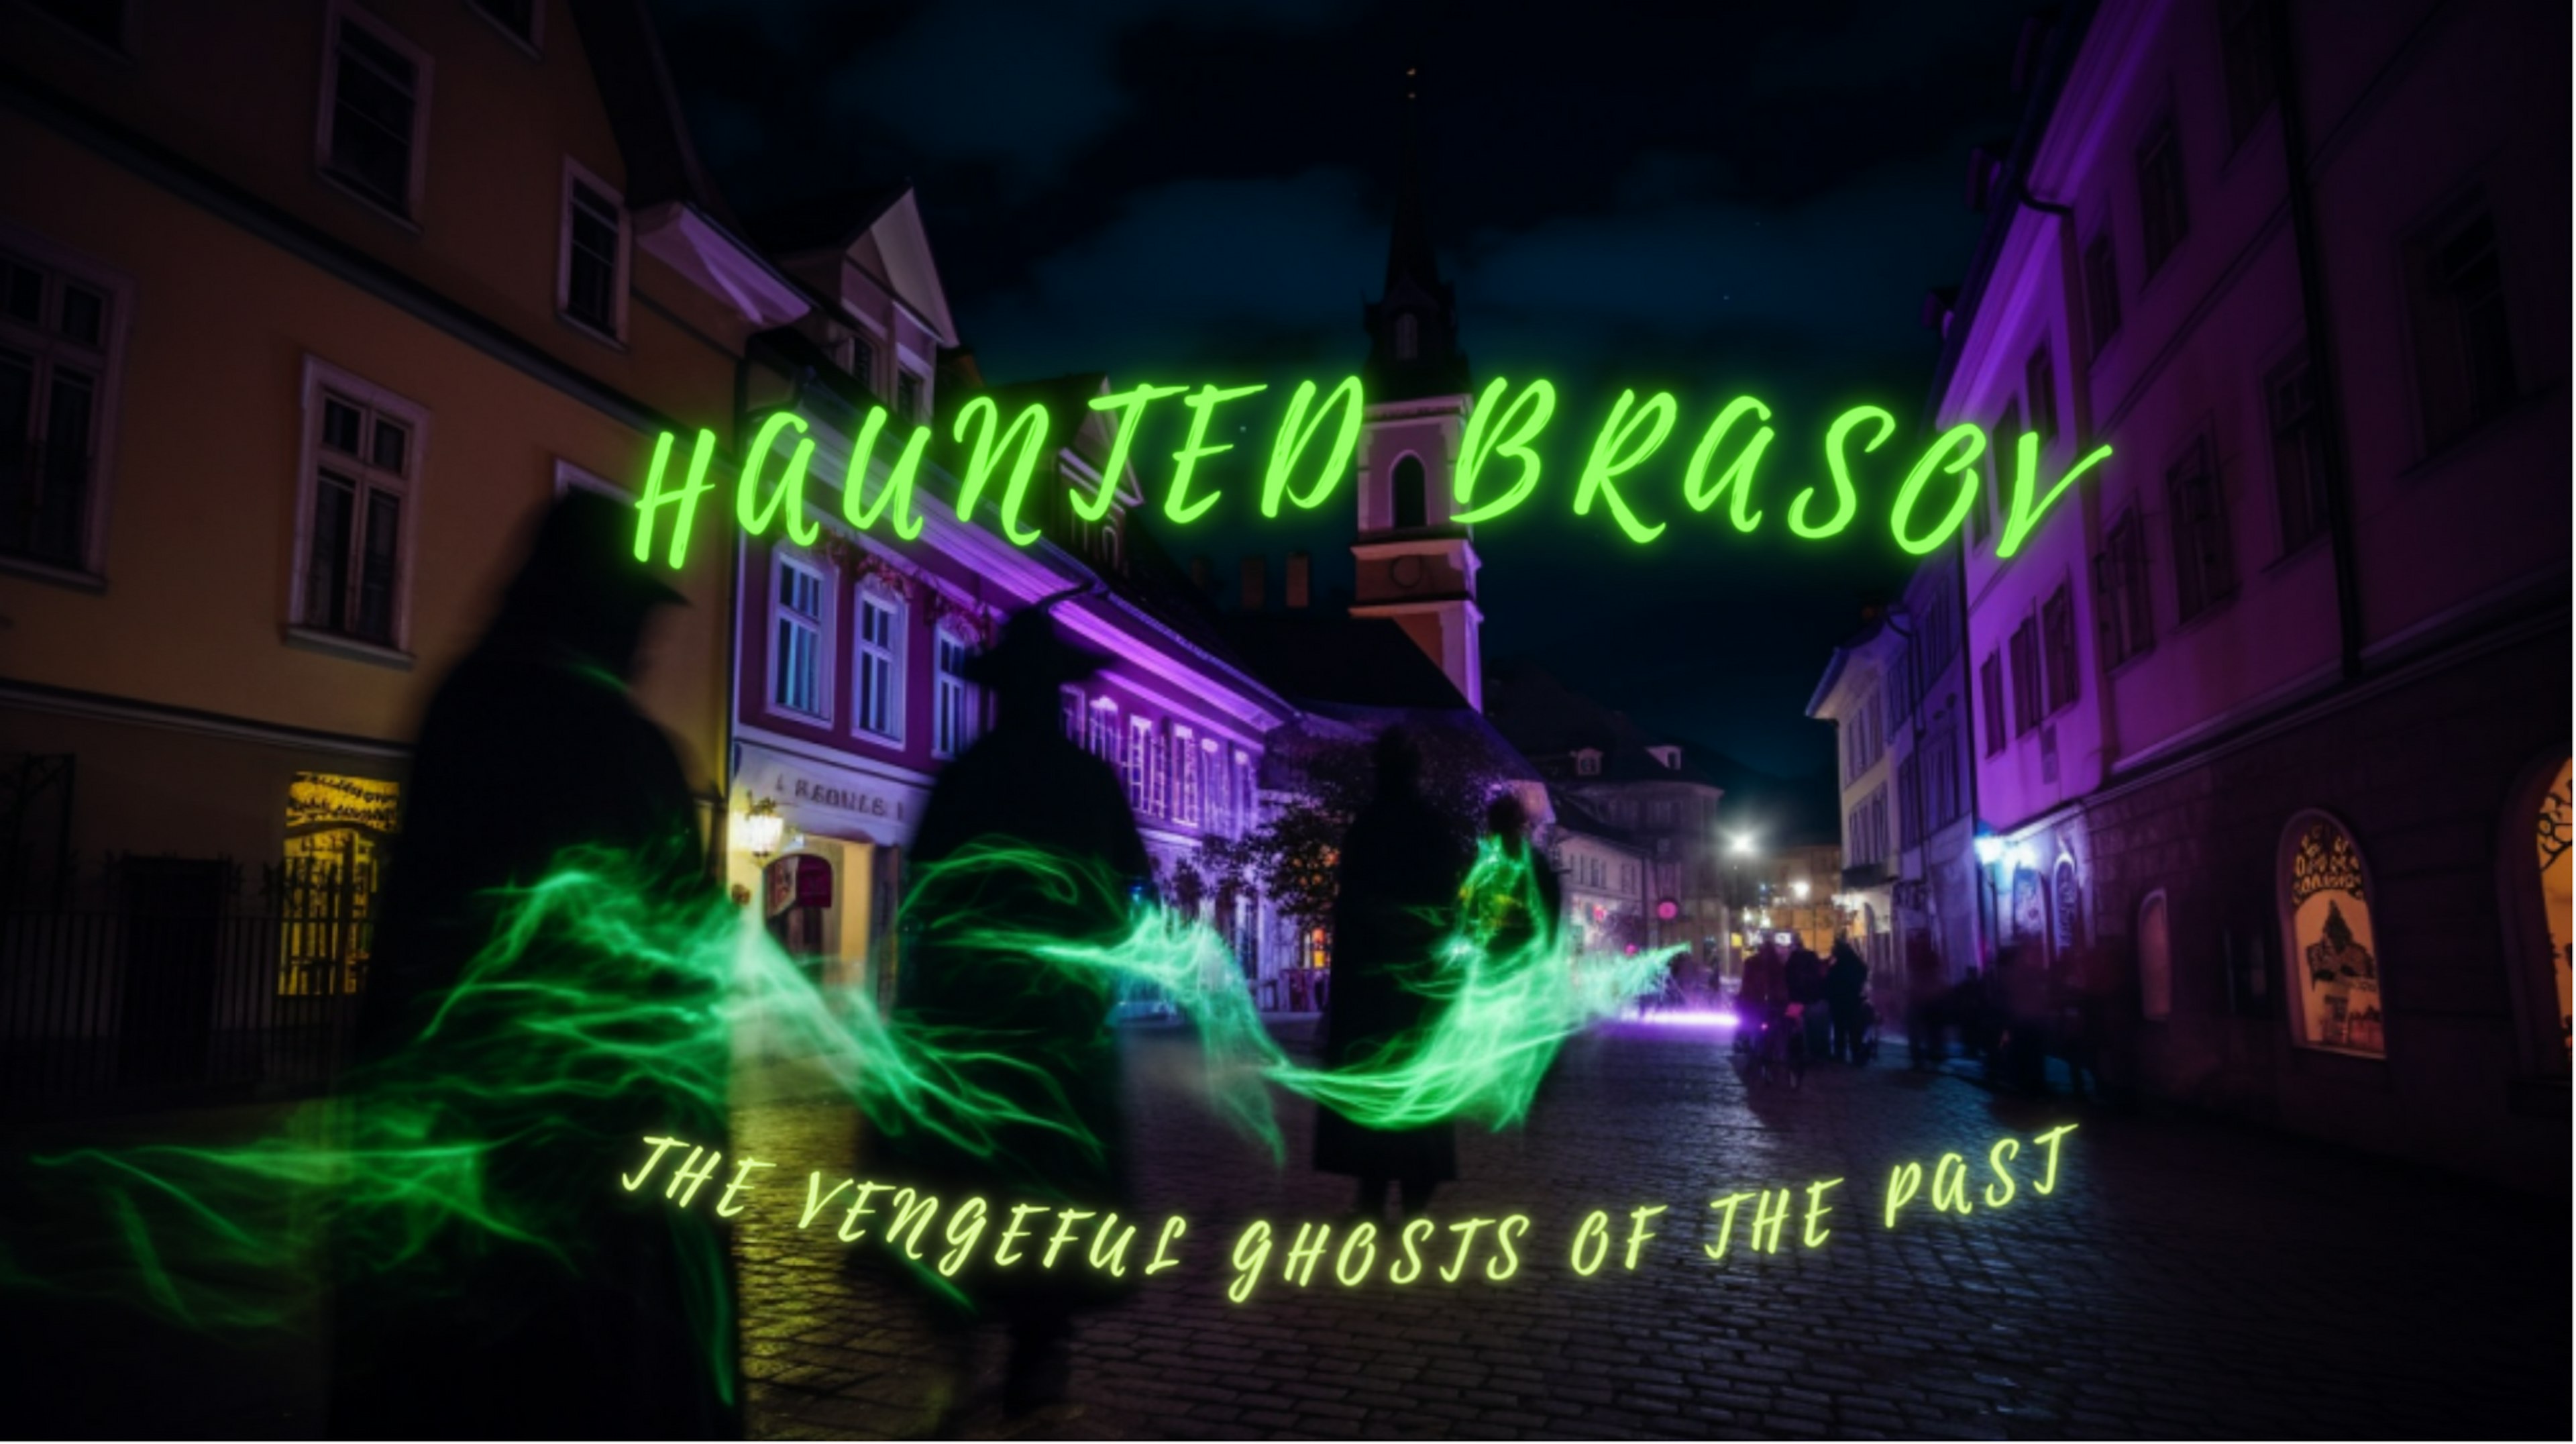 Haunted Brasov: The Vengeful Ghosts Of The Past